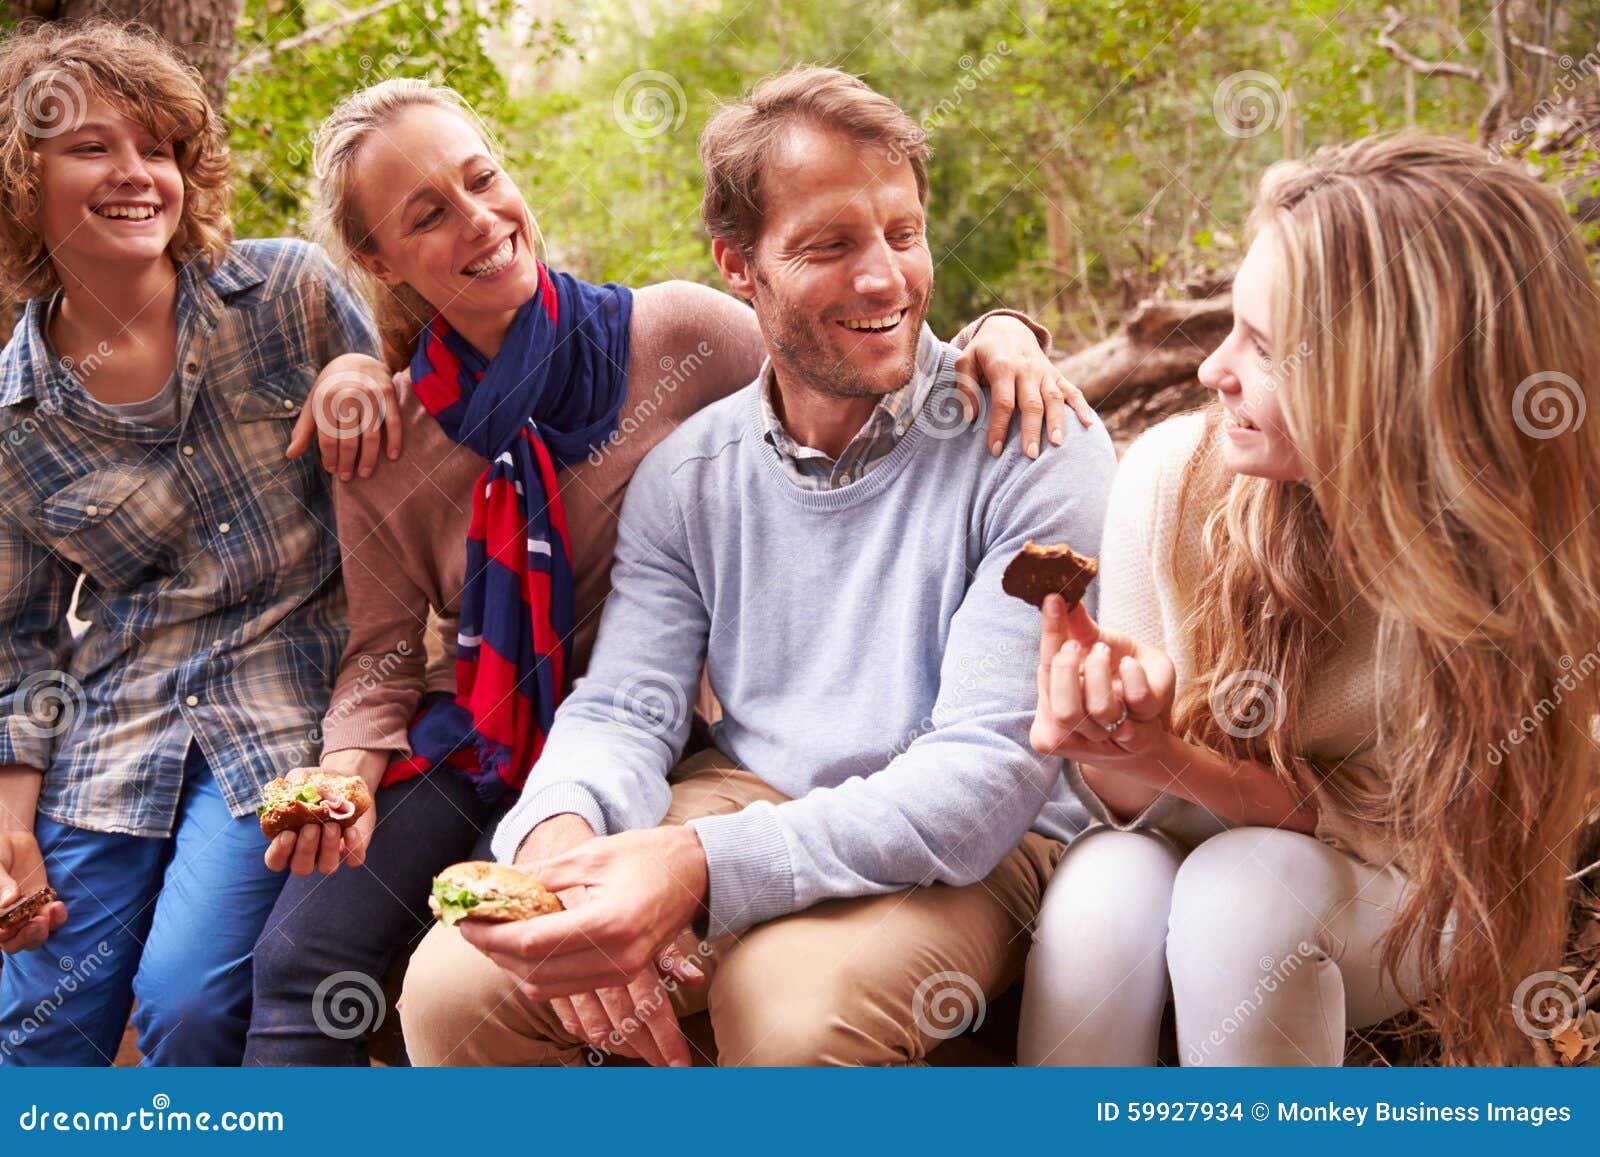 parents and teenage kids eating outdoors in a forest